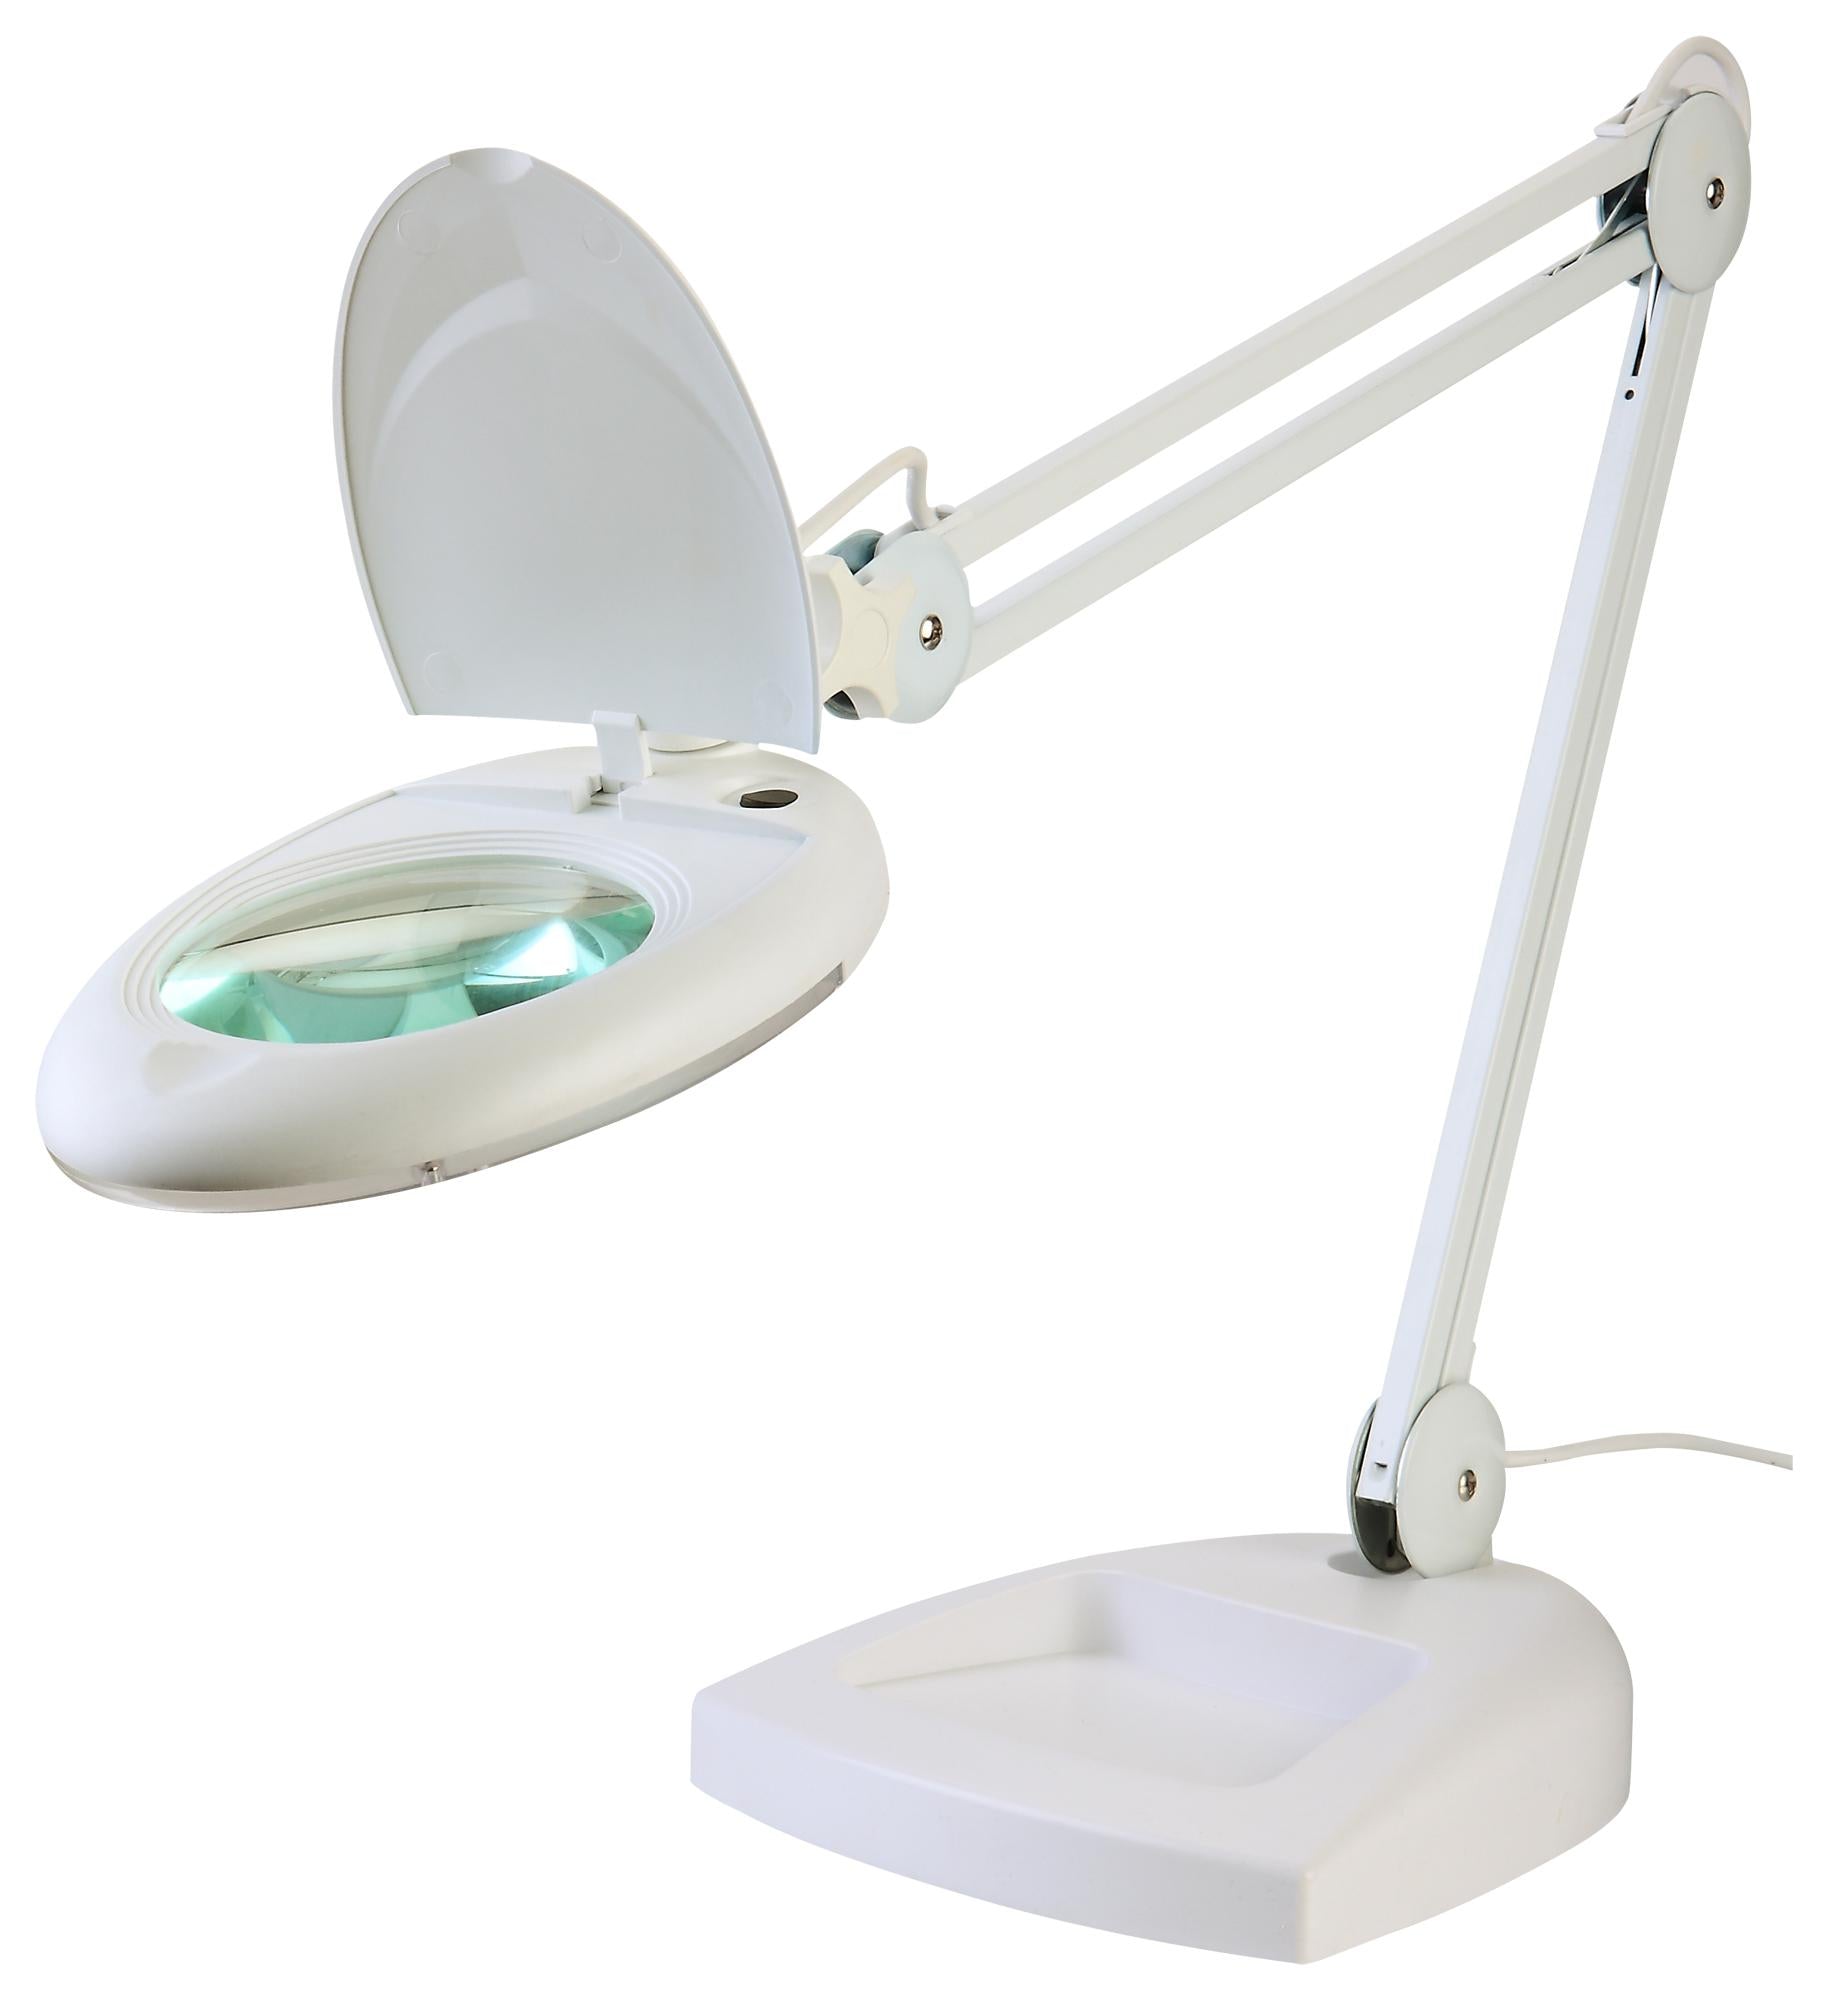 DT000089 LED MAGNIFYING LAMP, 5 DIOPTRE, 15W DURATOOL